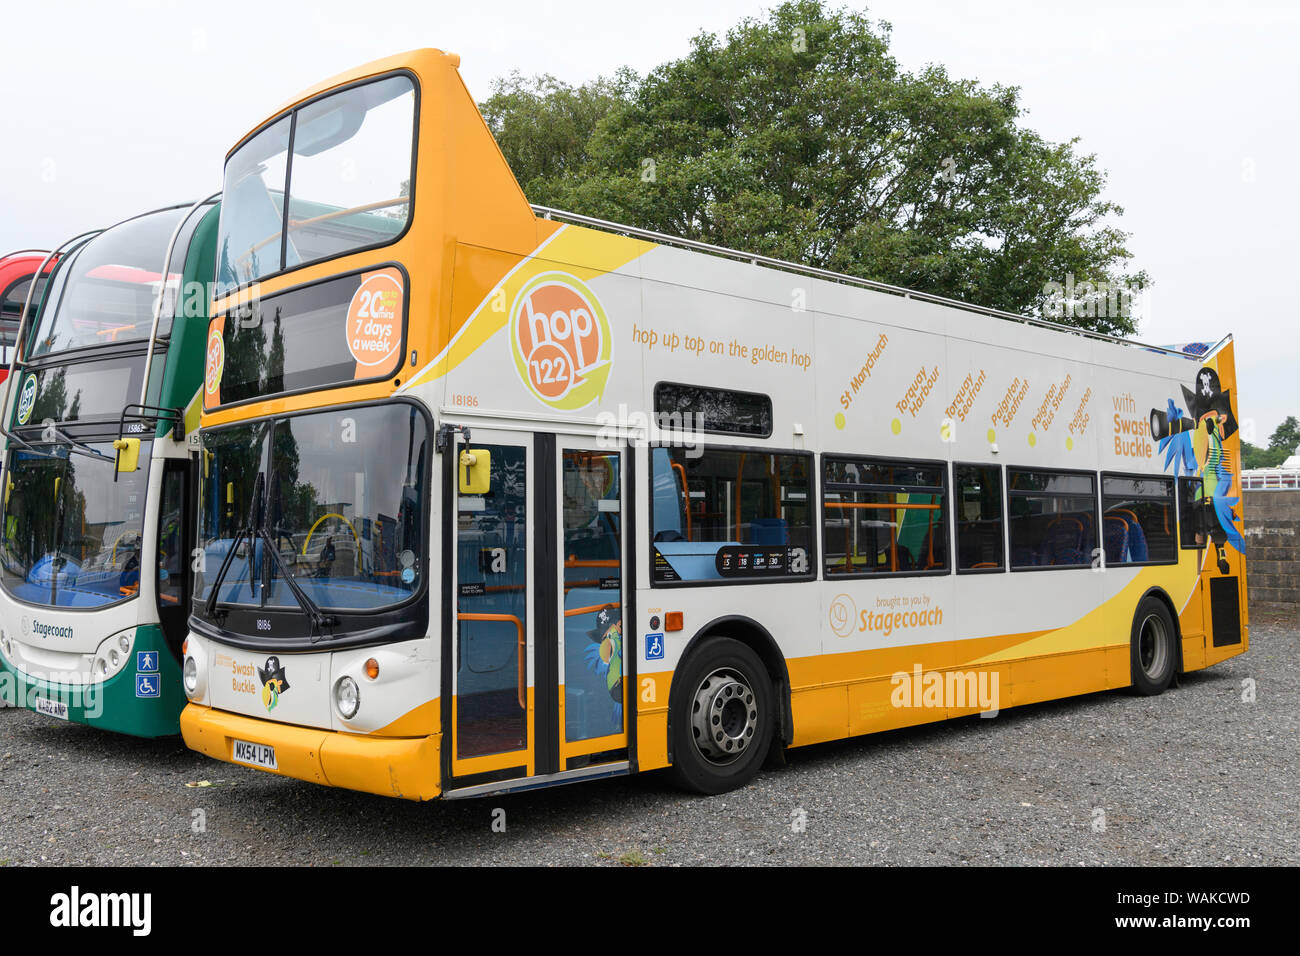 Stagecoach operated open top double decker bus. Stock Photo